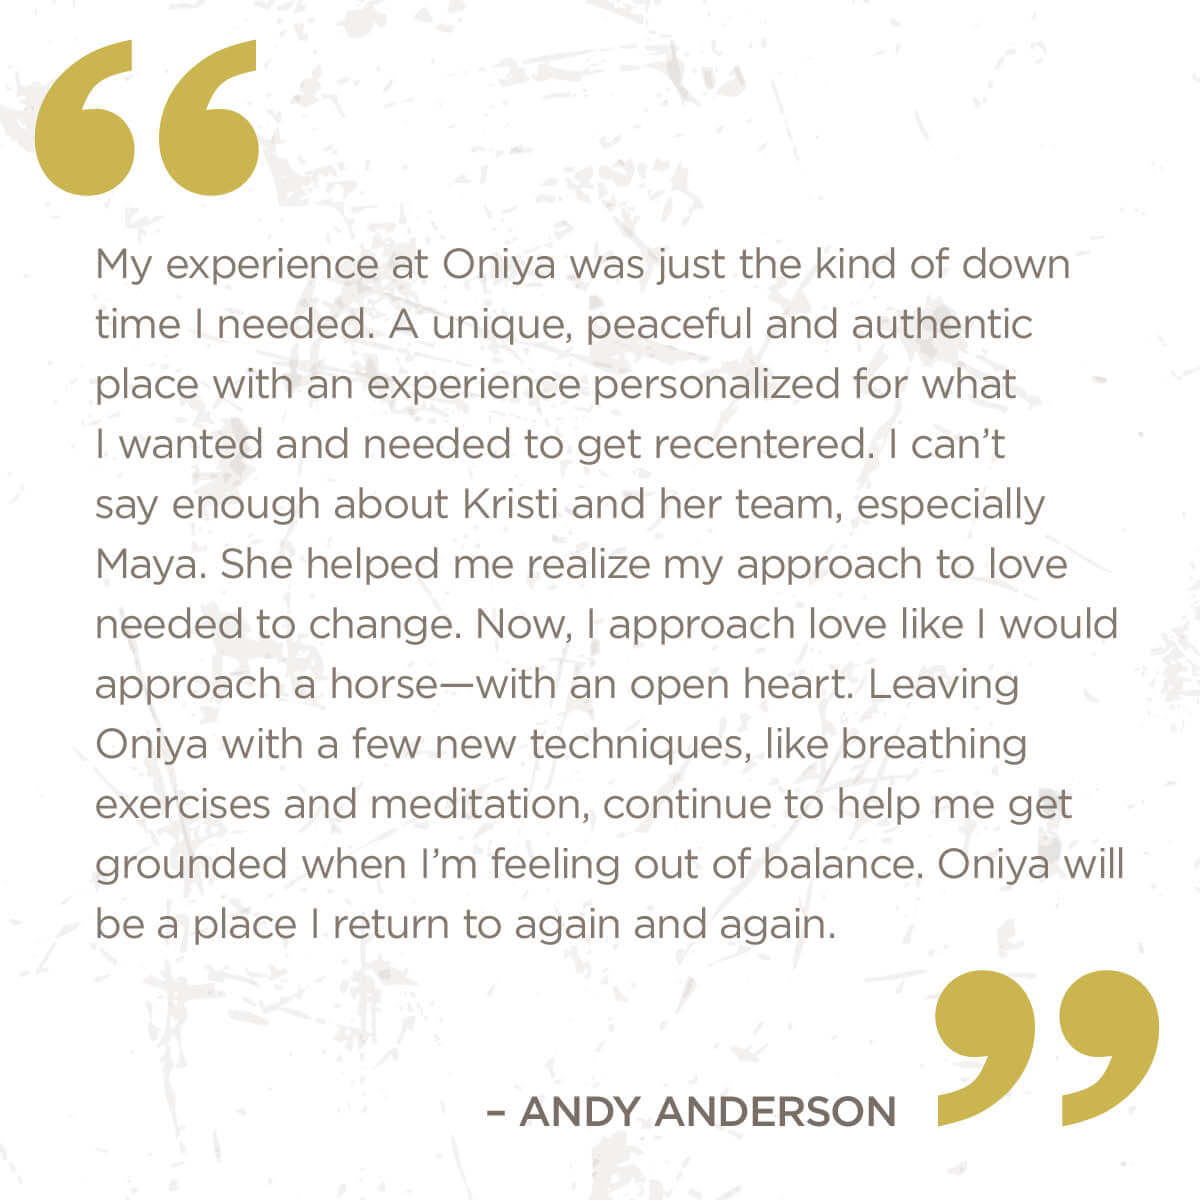 My experience at Oniya was just the kind of down time I needed. A unique, peaceful and authentic place with an experience personalized for what I wanted and needed to get recentered. I can't say enough about Kristi and her team, especially Maya. 